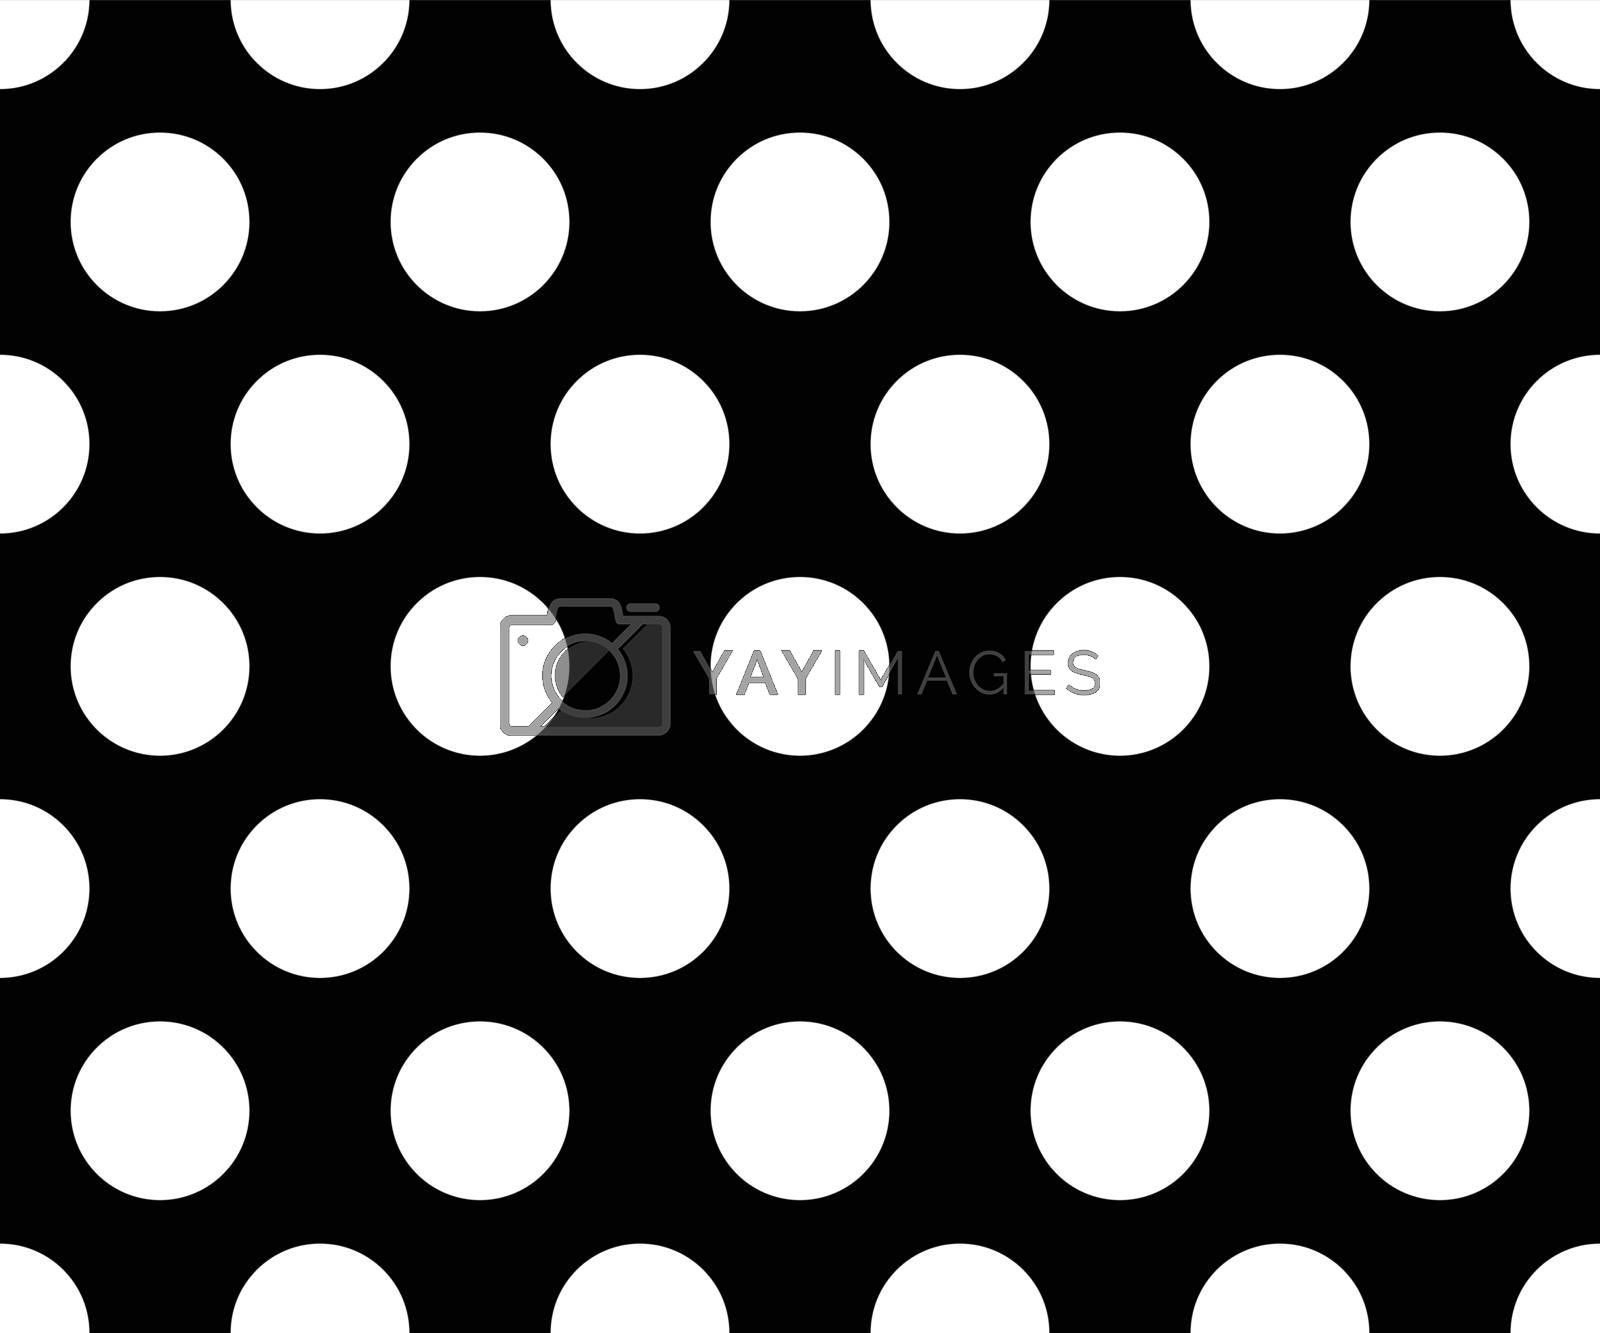 Royalty free image of black and white polka dot pattern abstract background vector by Rodseng